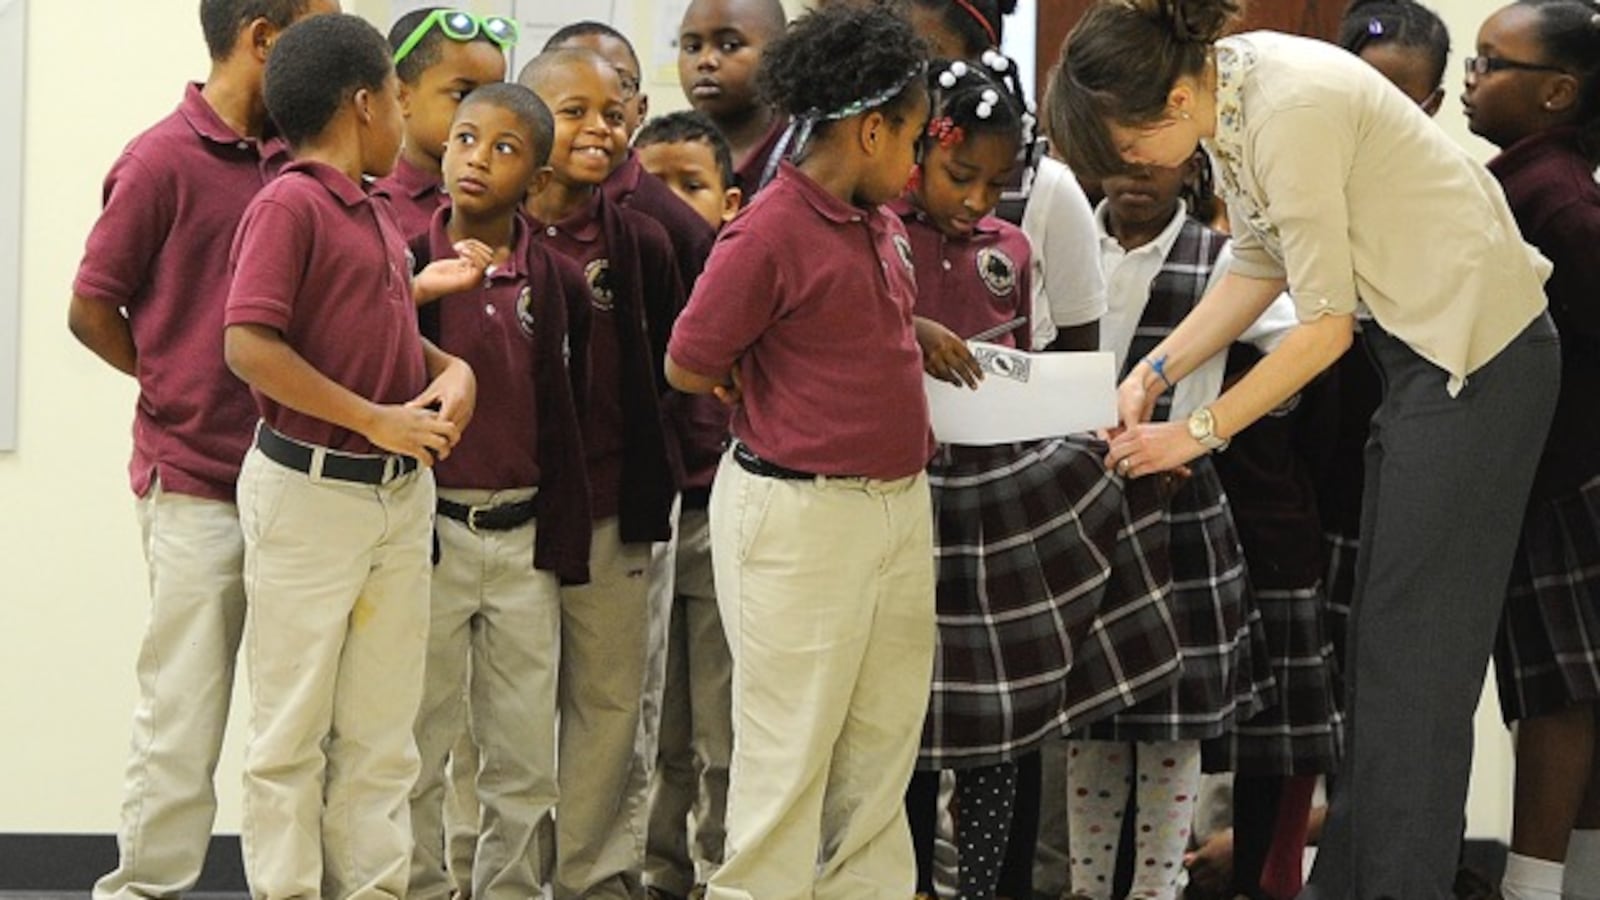 Tindley schools is considering joining the Indianapolis Public Schools innovation network.